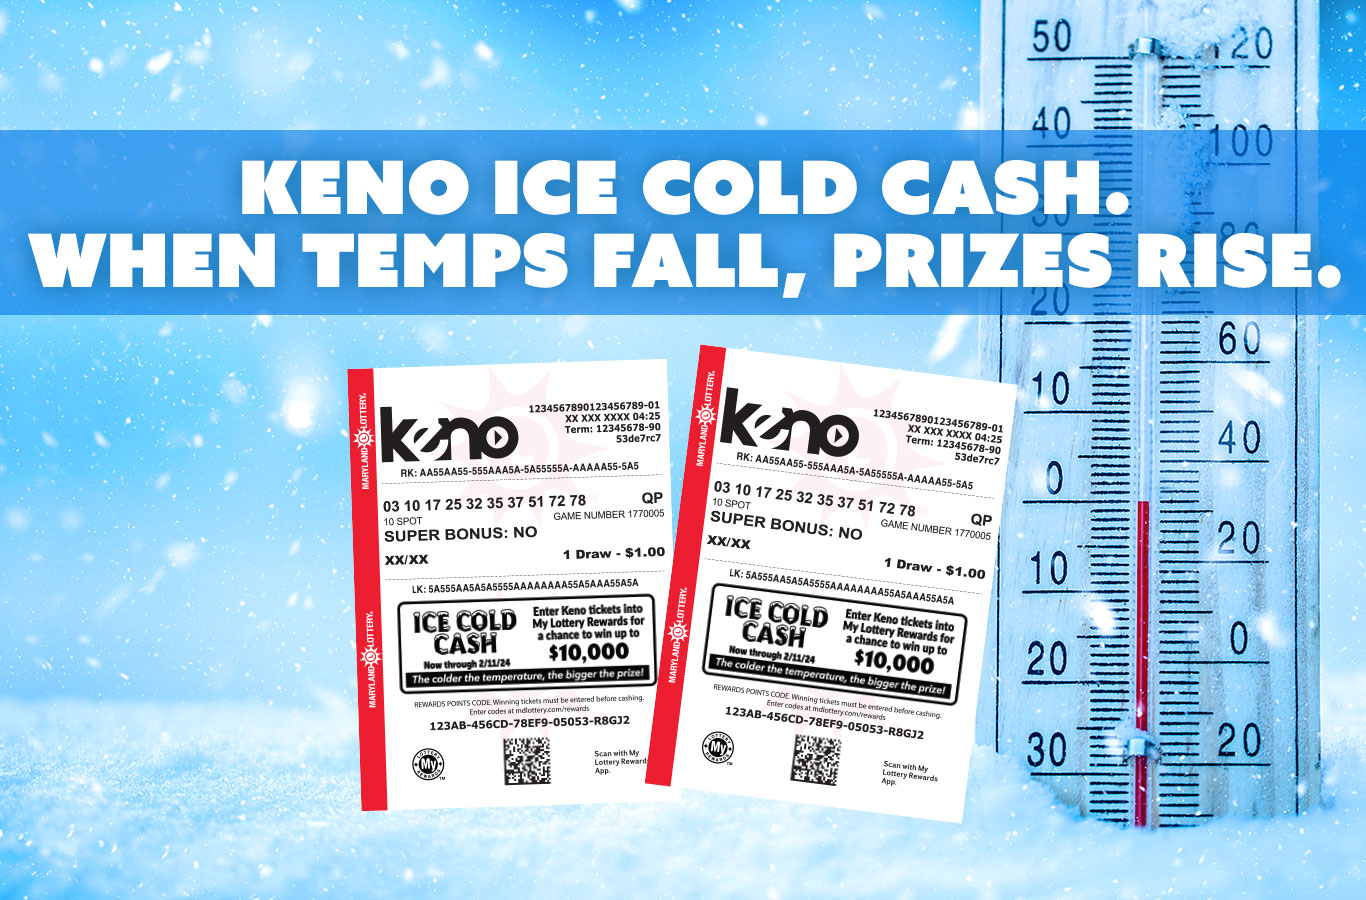 Enter with any Keno tickets purchased January 15 - February 11 for a second chance to win up to $10,000!